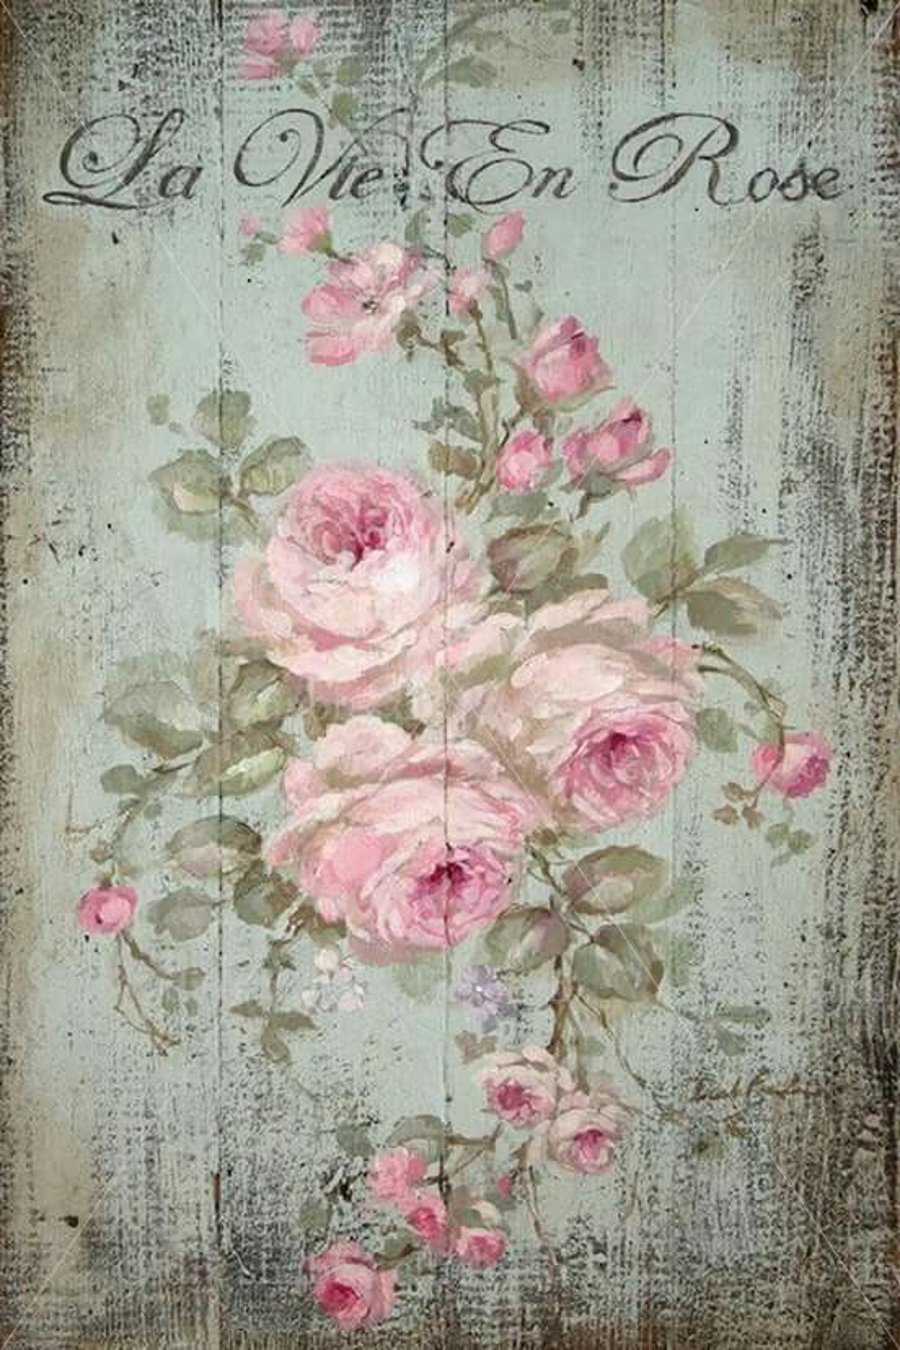 Waterslide Wood Furniture Decal Vintage Image Transfer Shabby Chic Painted Rose